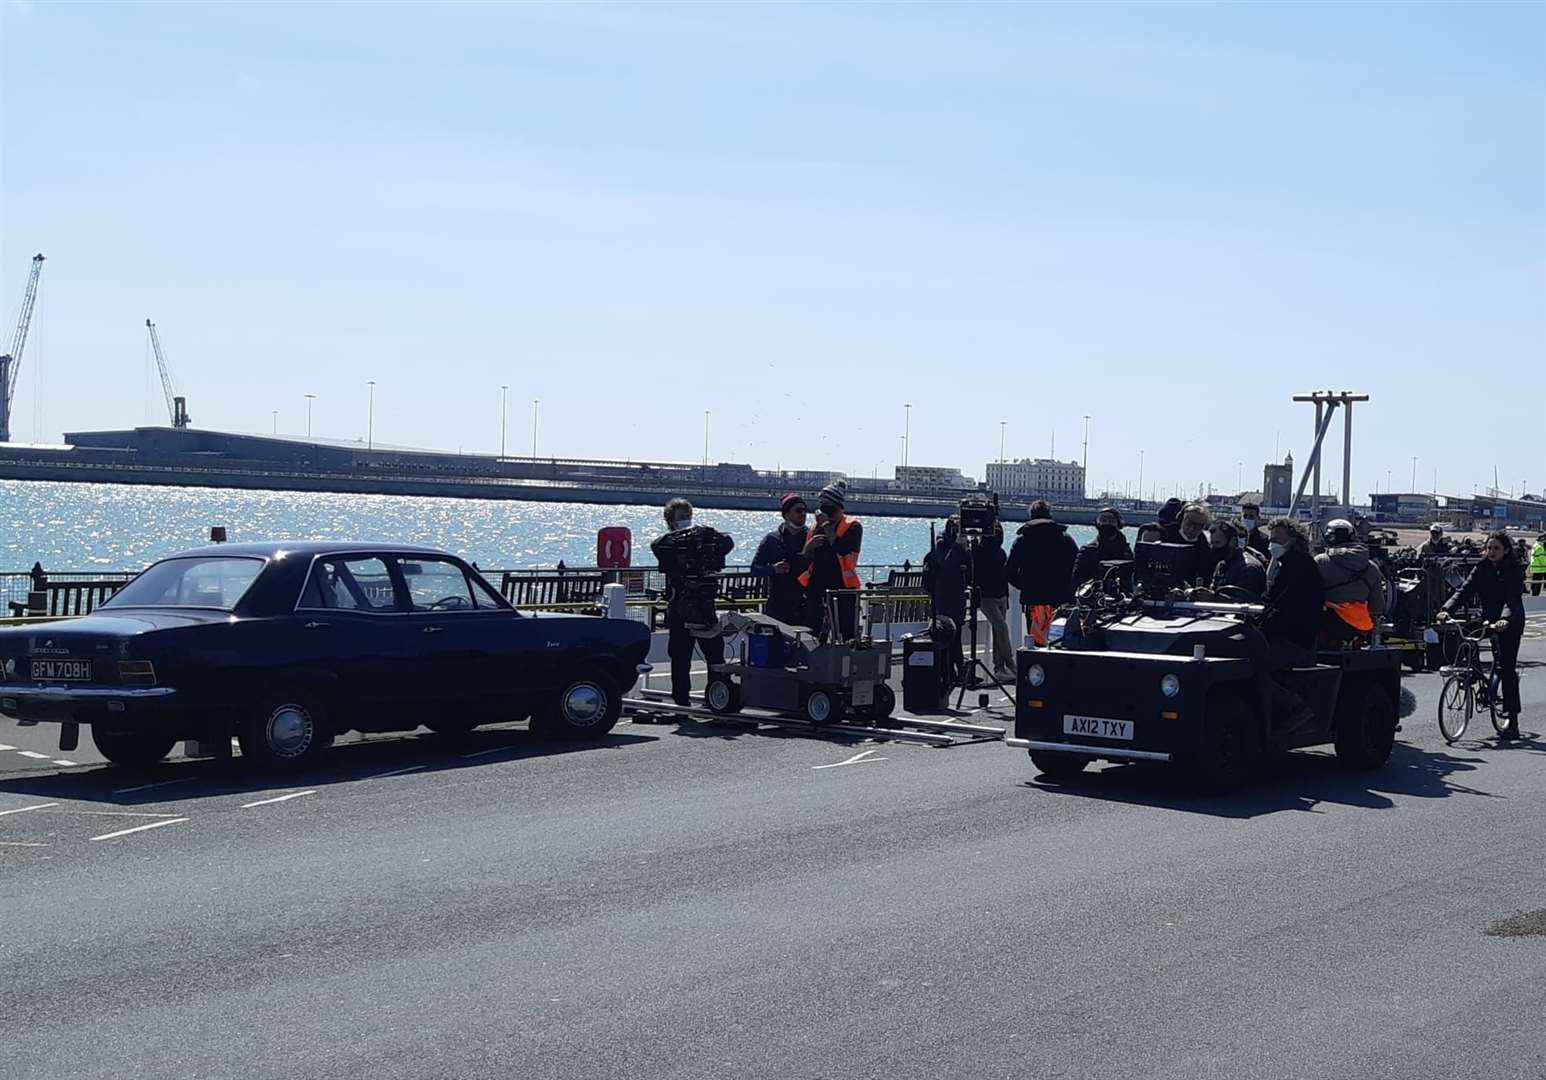 1970s vehicles are used in the seafront set as a treat for classic car enthusiasts - if they can get to them...